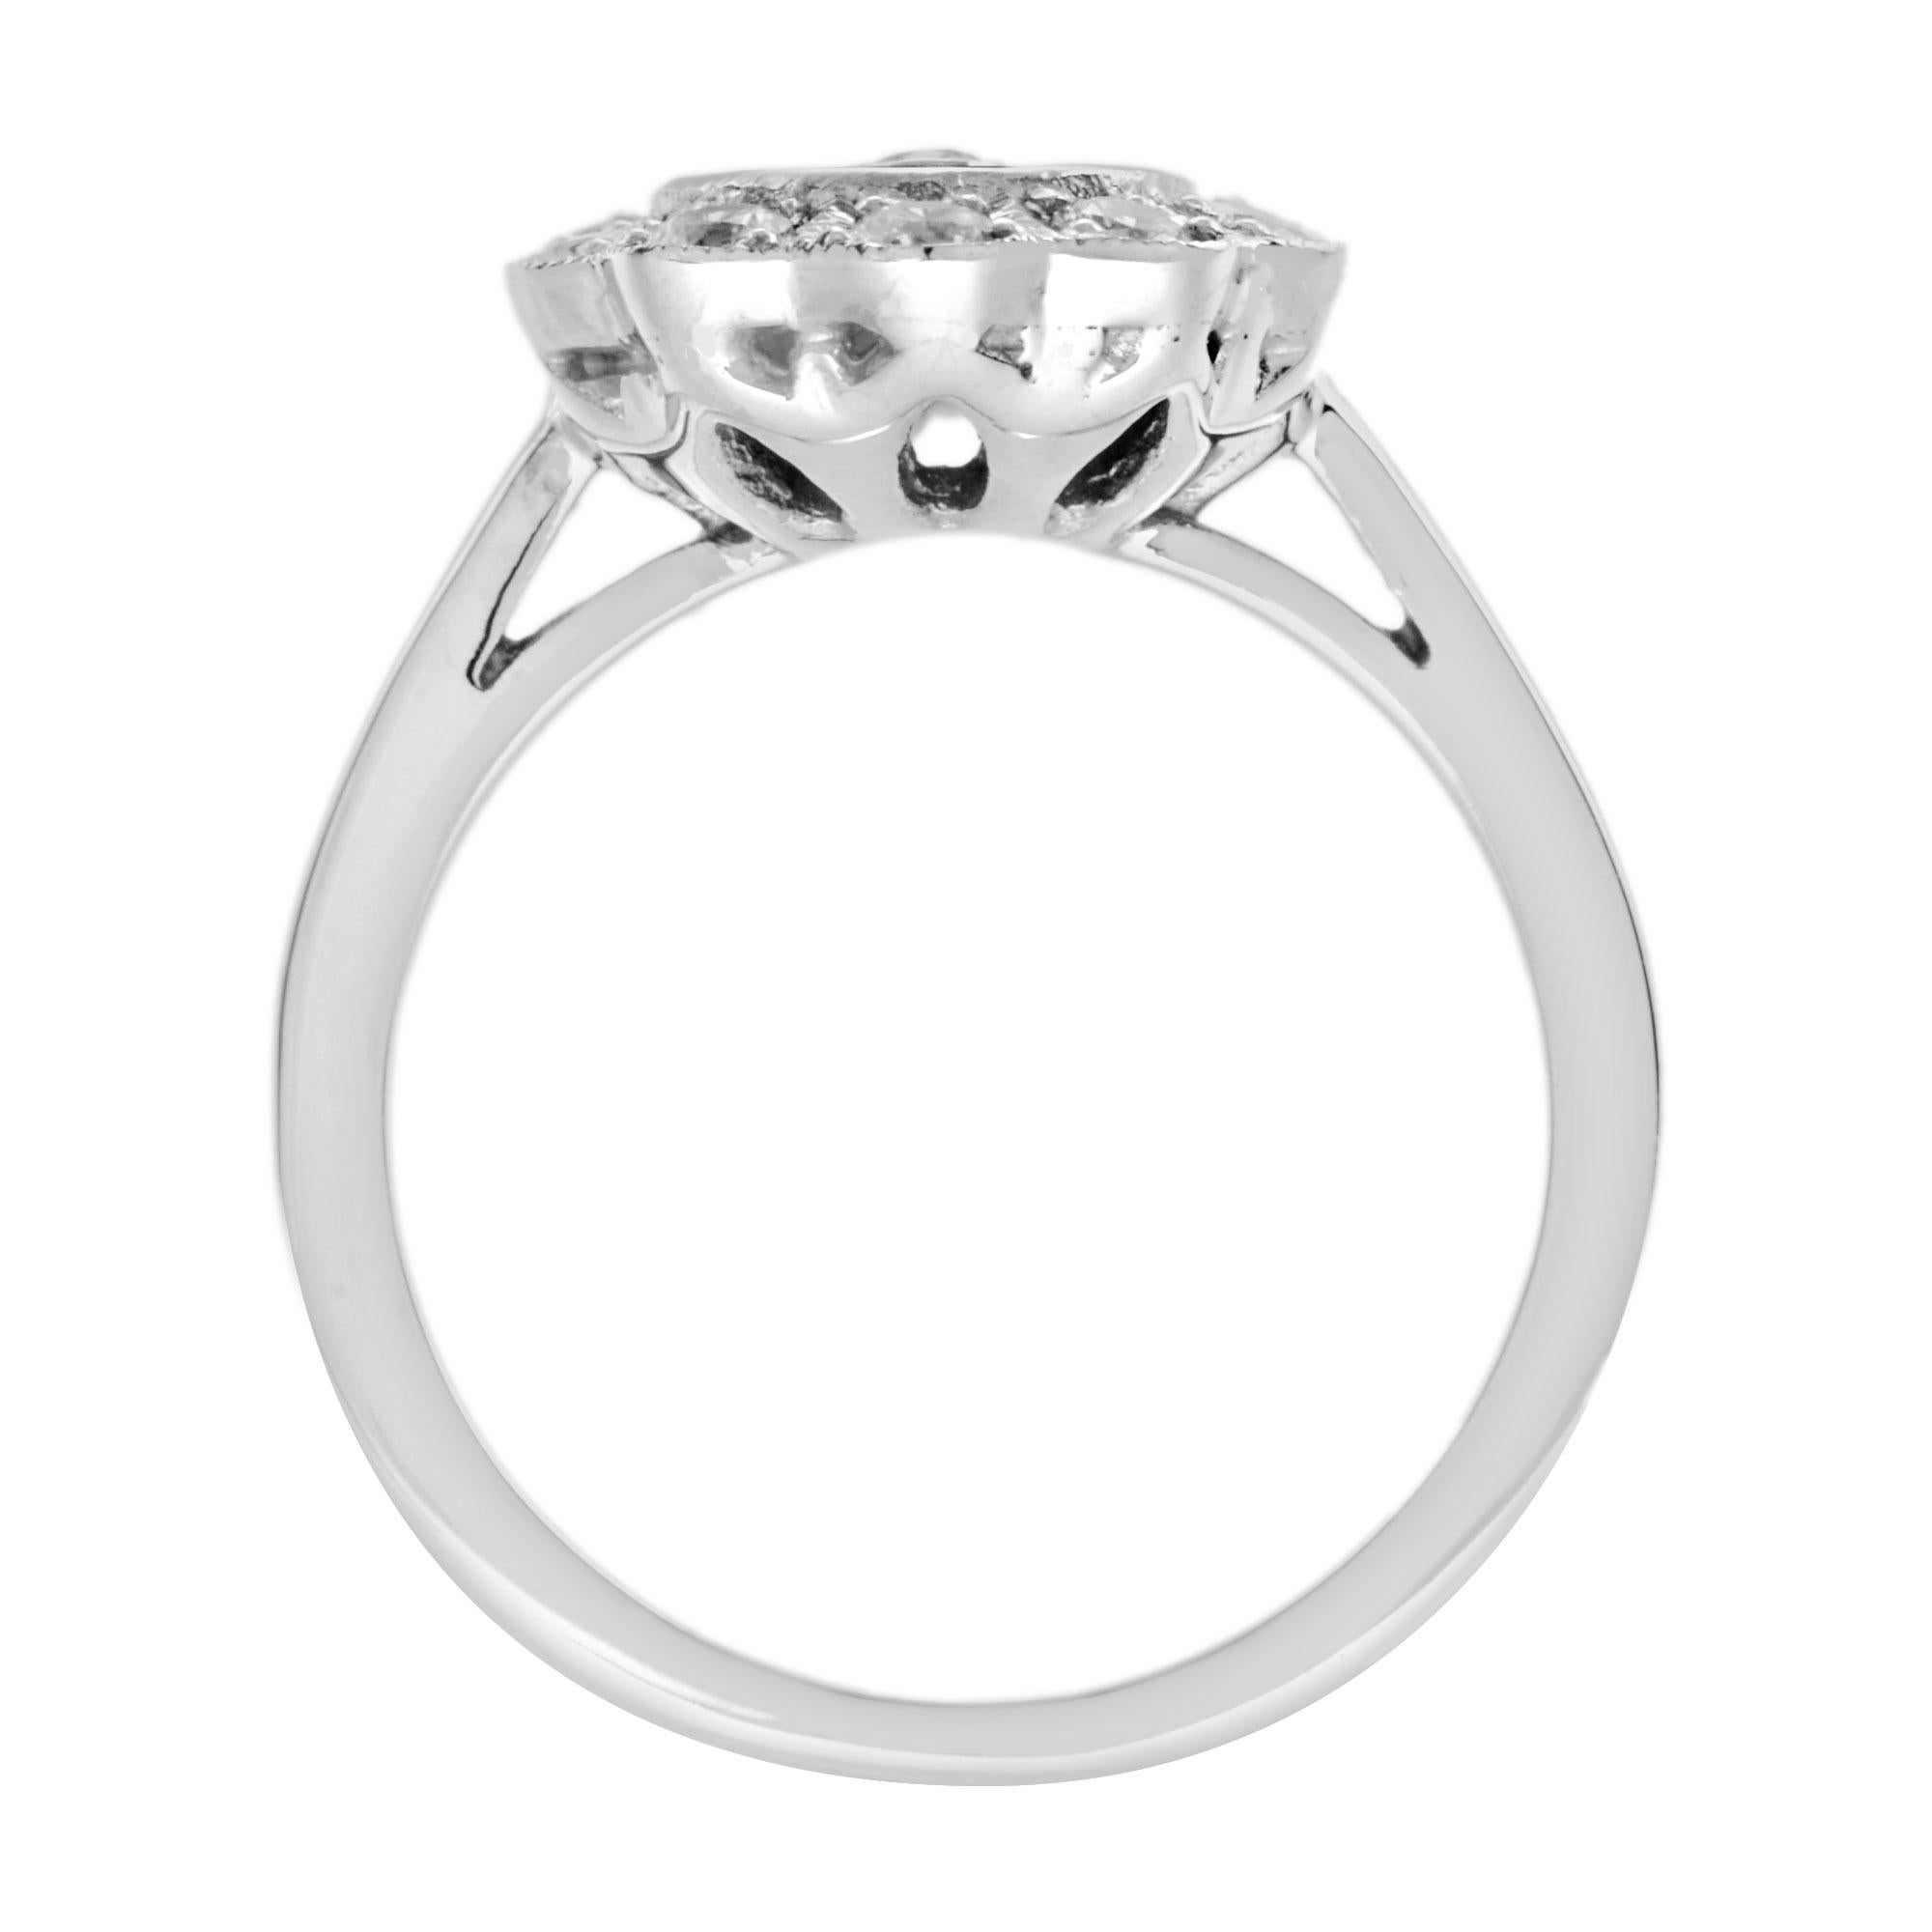 Diamond and Onyx Art Deco Style Halo Ring in 14K White Gold For Sale 1